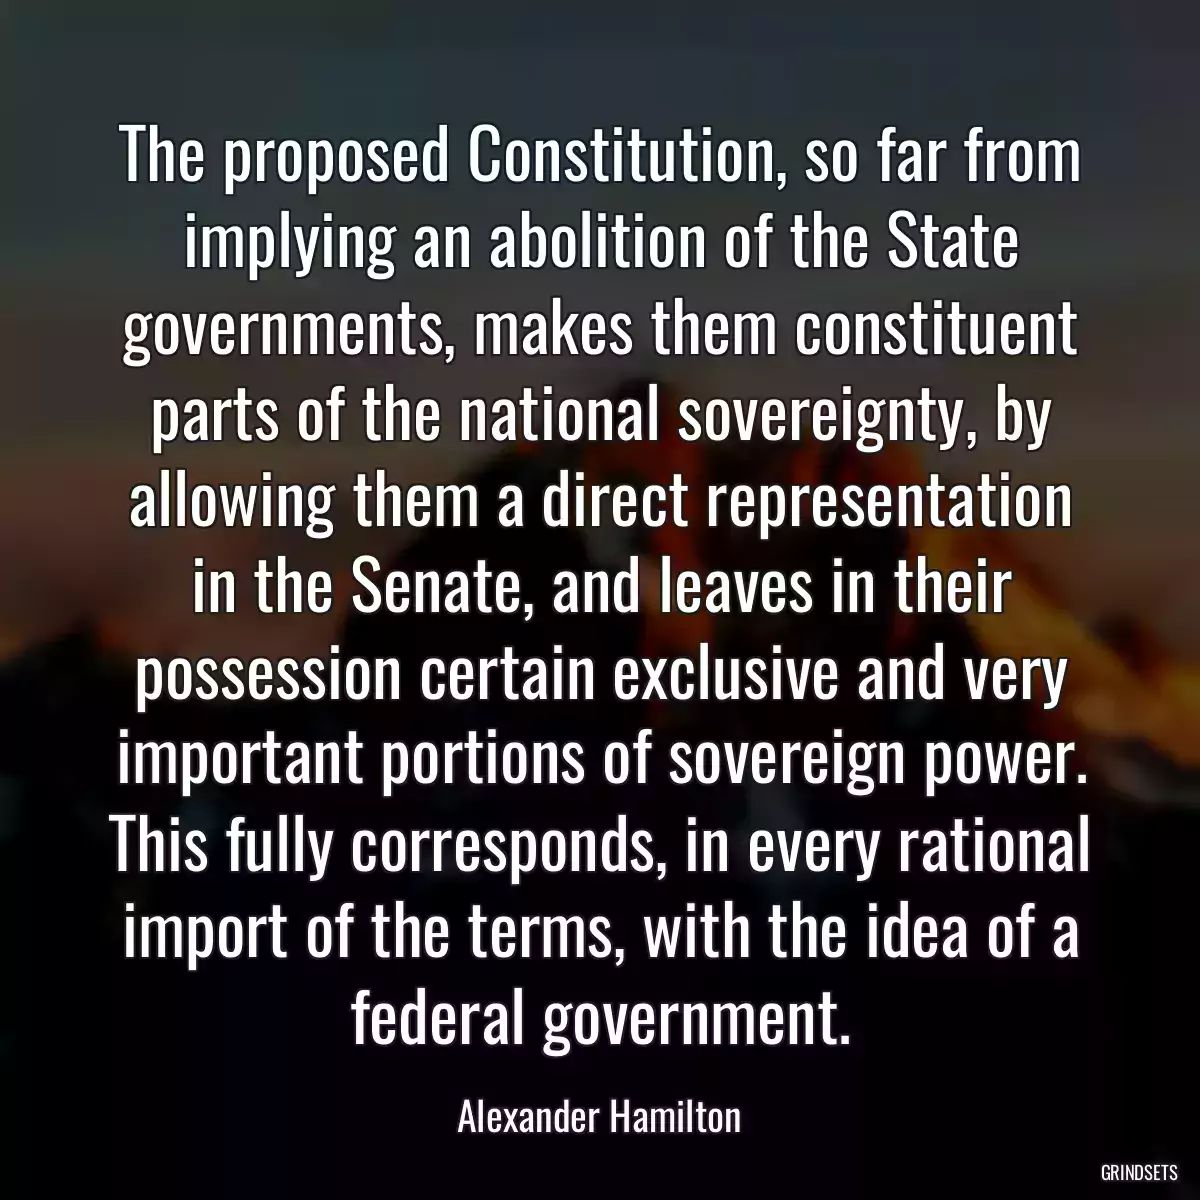 The proposed Constitution, so far from implying an abolition of the State governments, makes them constituent parts of the national sovereignty, by allowing them a direct representation in the Senate, and leaves in their possession certain exclusive and very important portions of sovereign power. This fully corresponds, in every rational import of the terms, with the idea of a federal government.